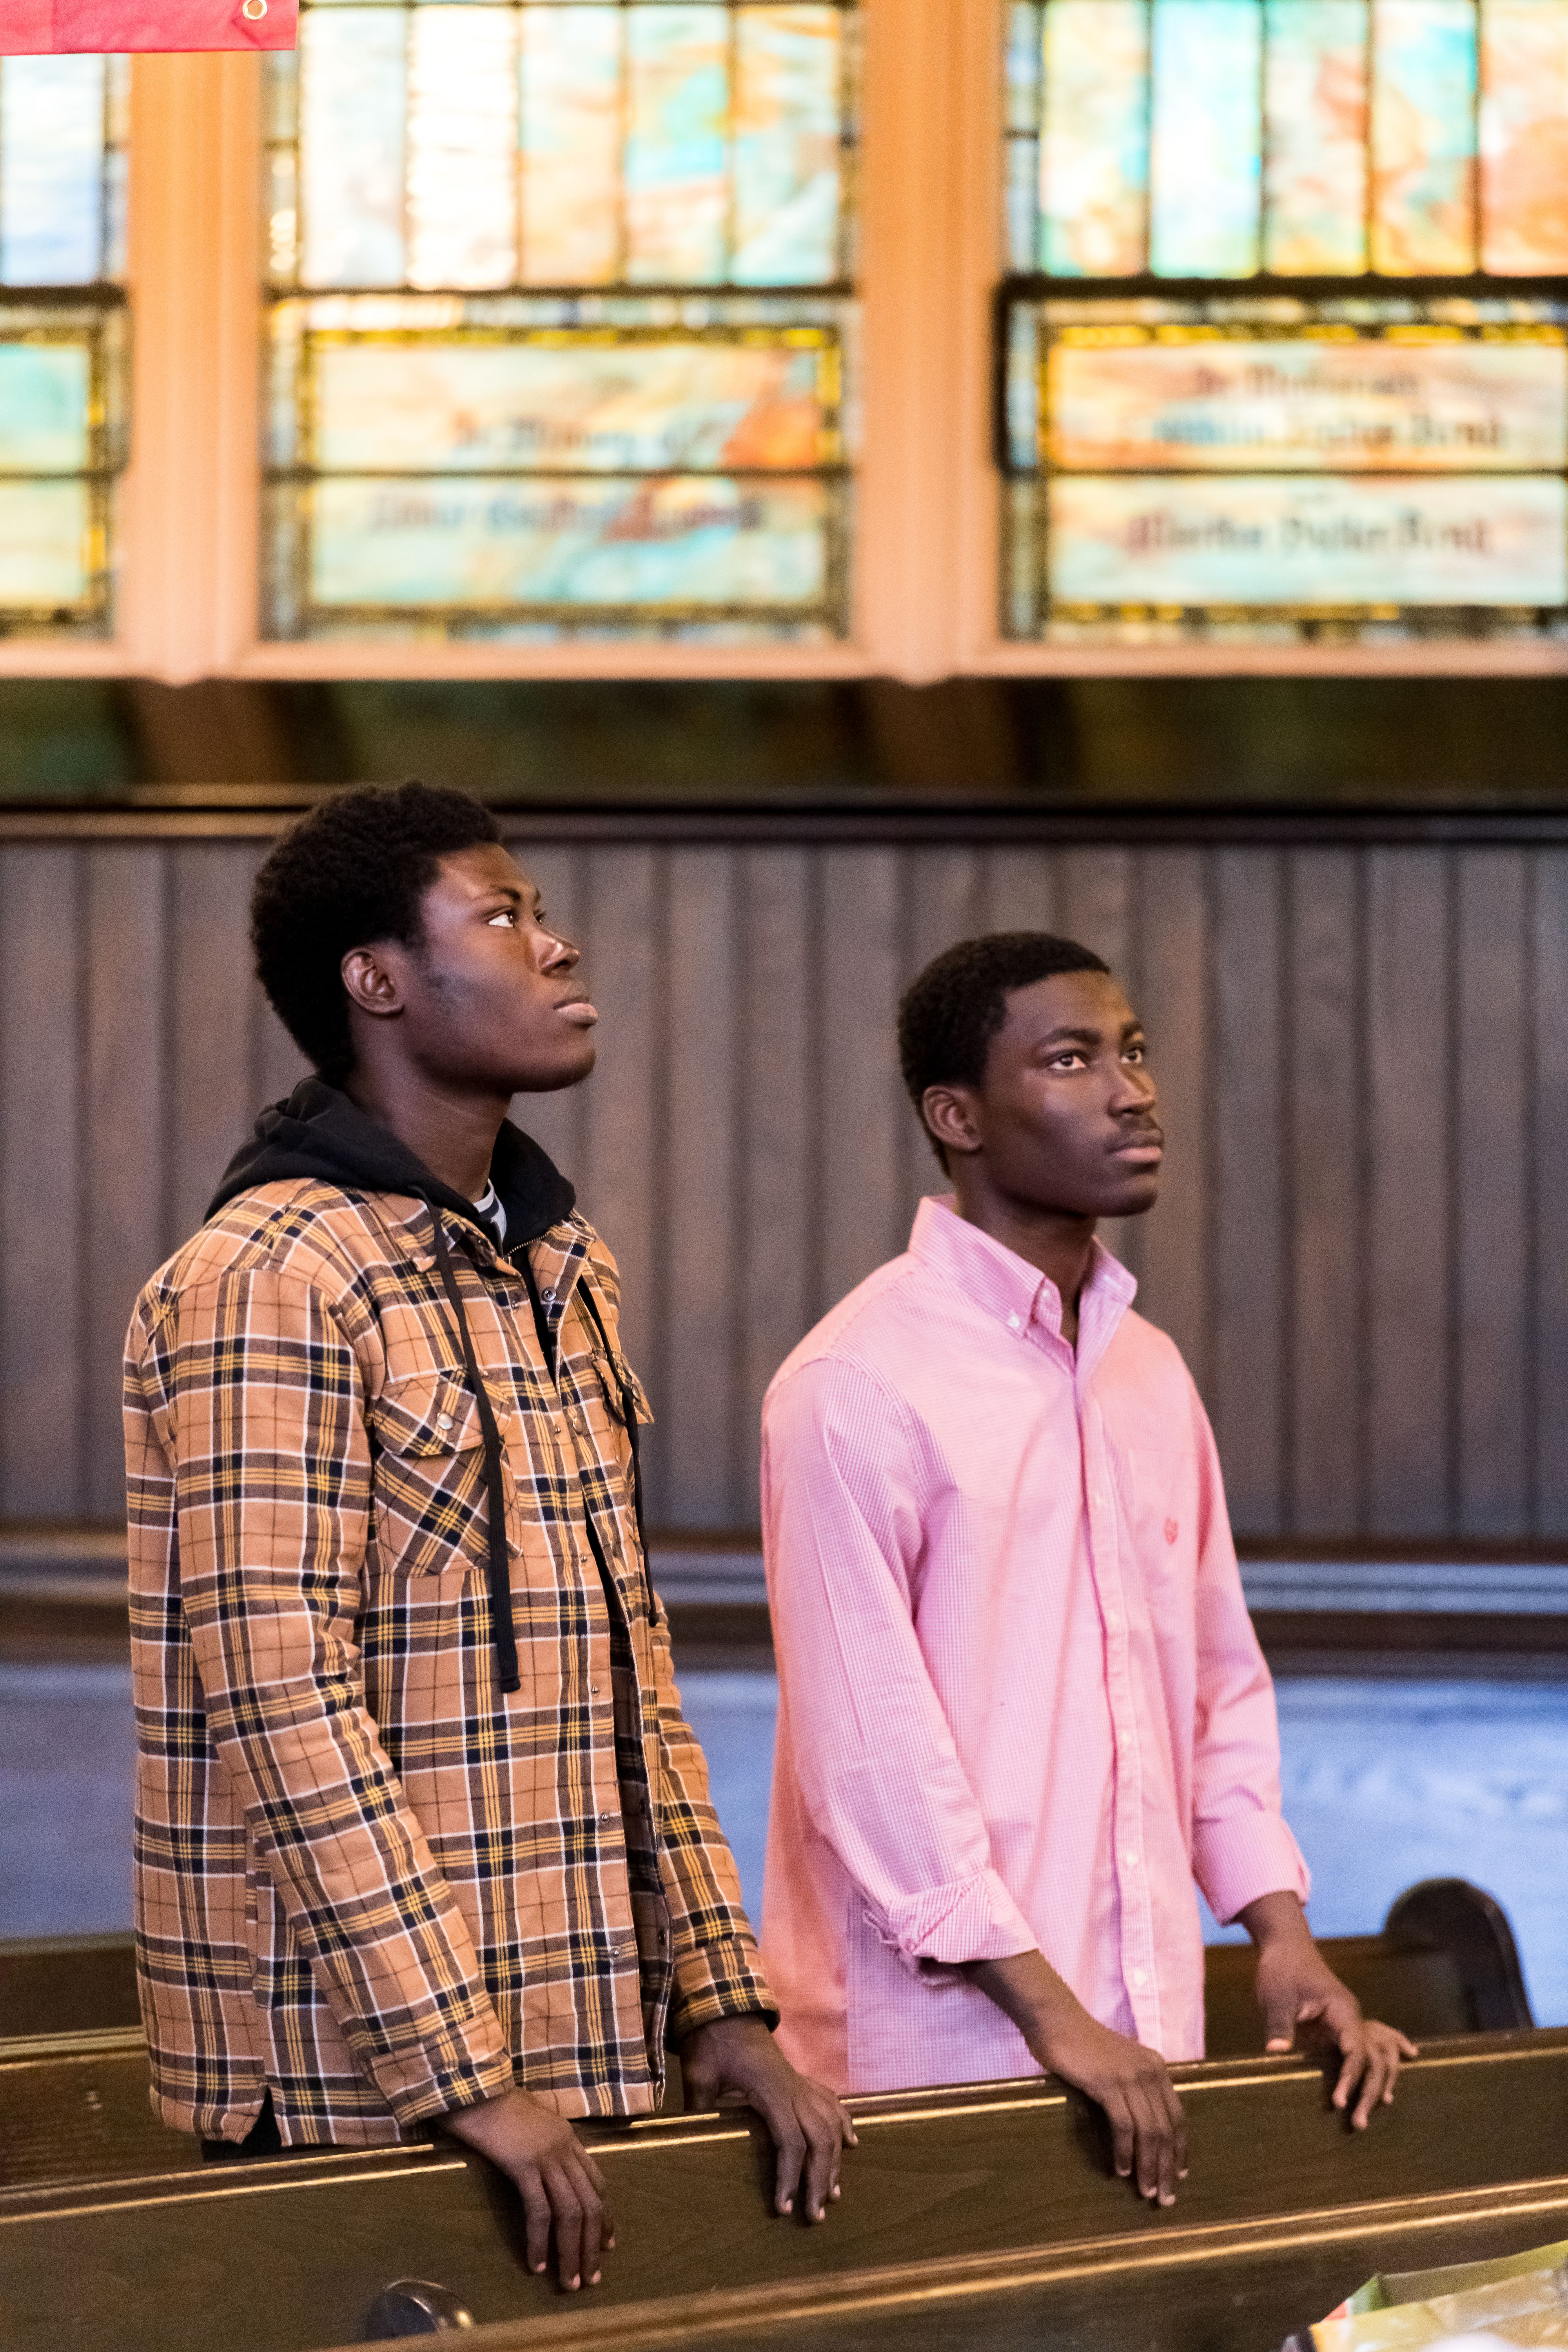 Two young African American men in church with stained glass in background